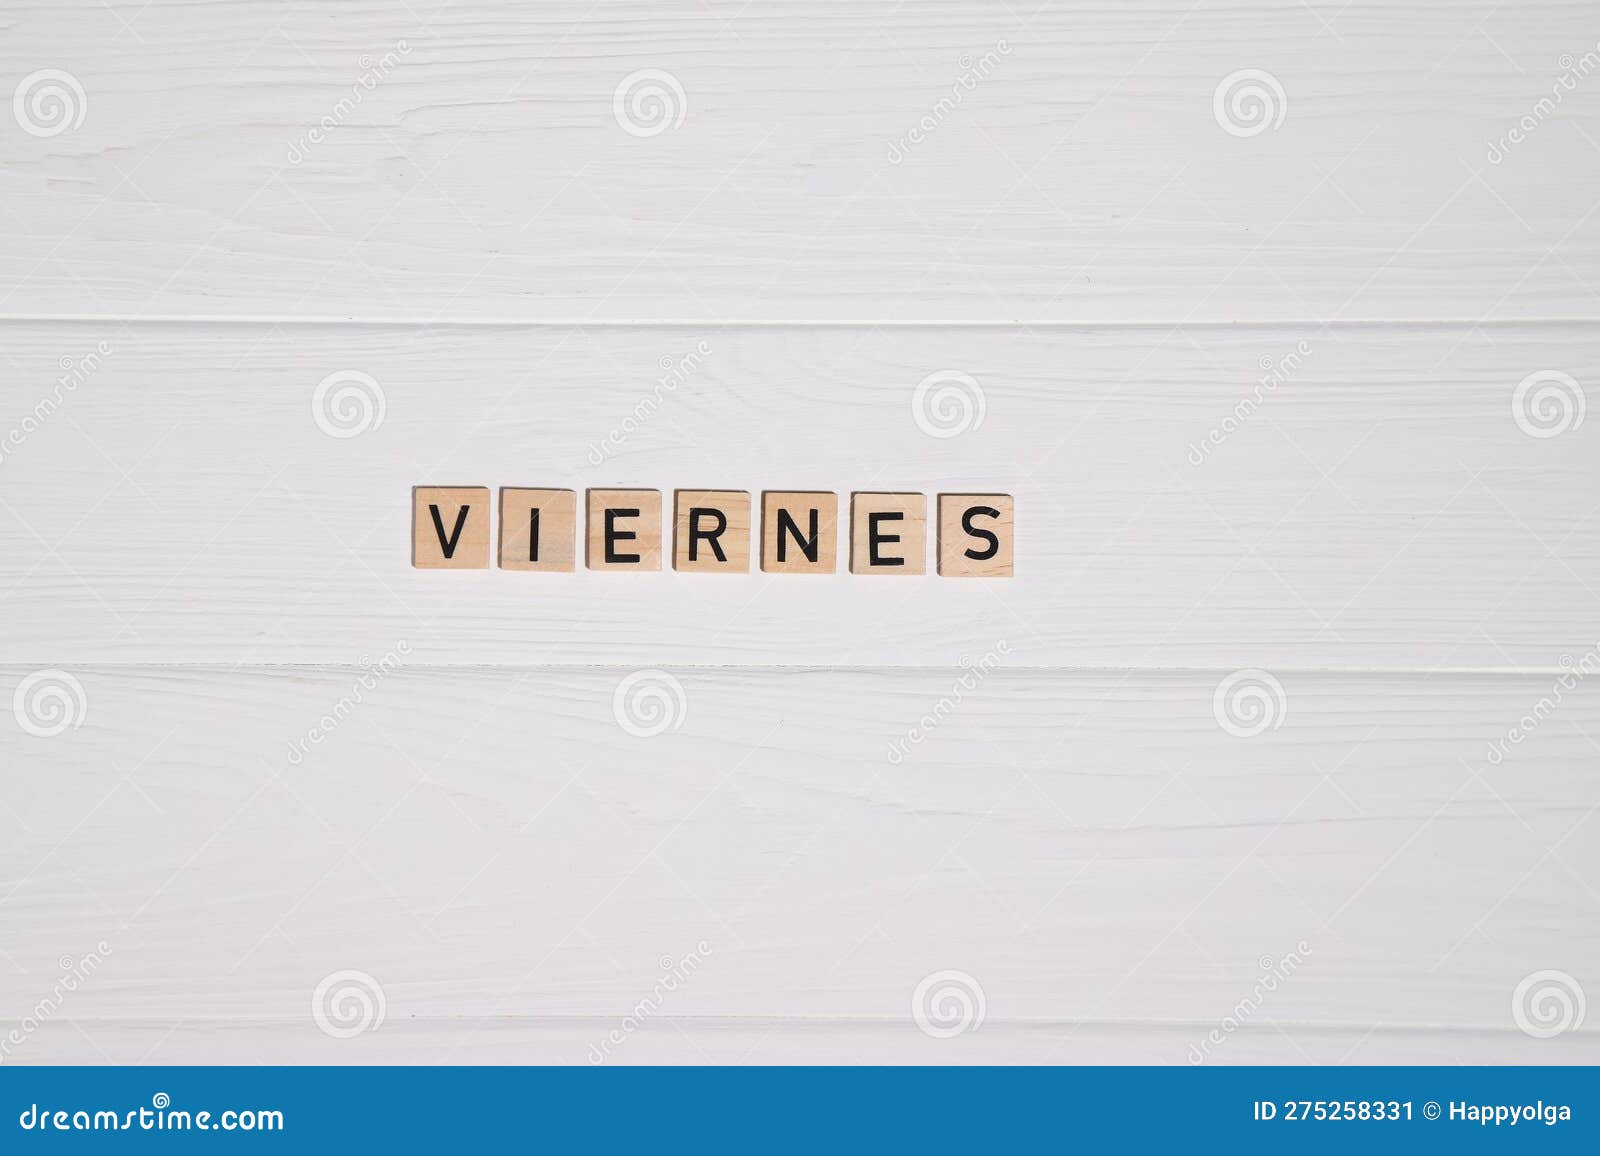 viernes week day name on white wooden background